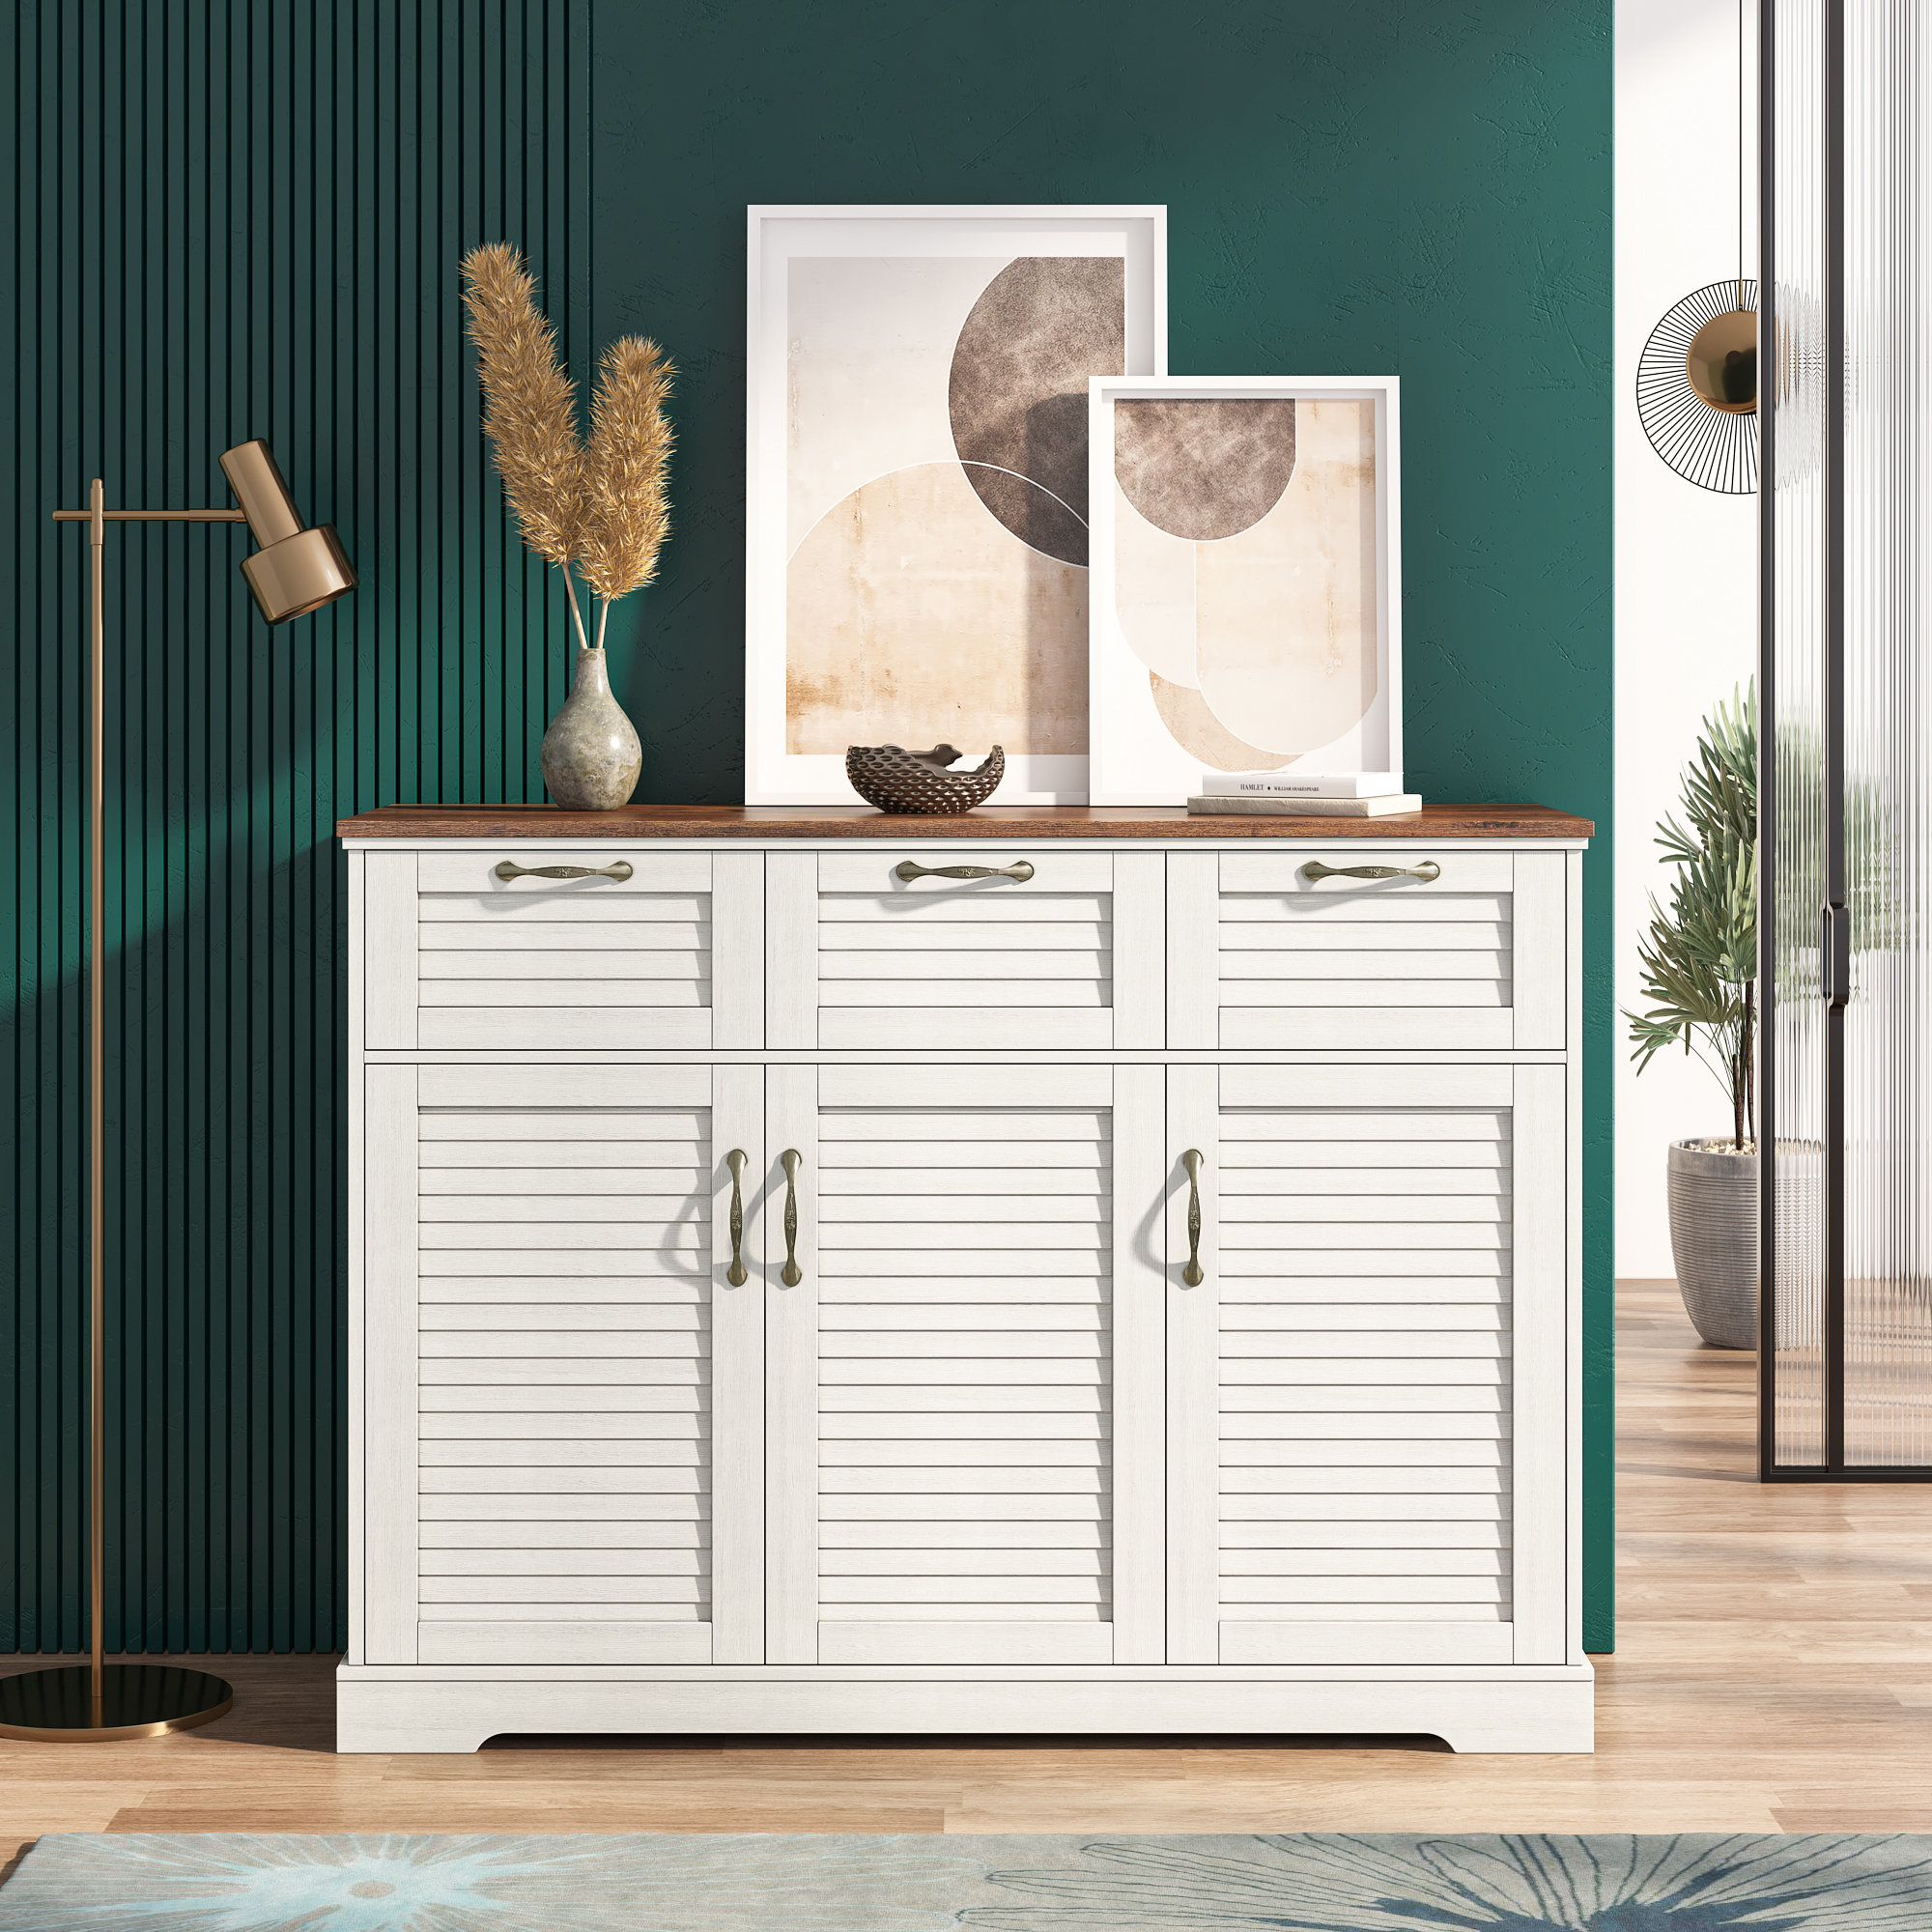 Pernell 31 W x 63 H x 16 D Free-Standing Bathroom Cabinet Lark Manor Finish: Pure White